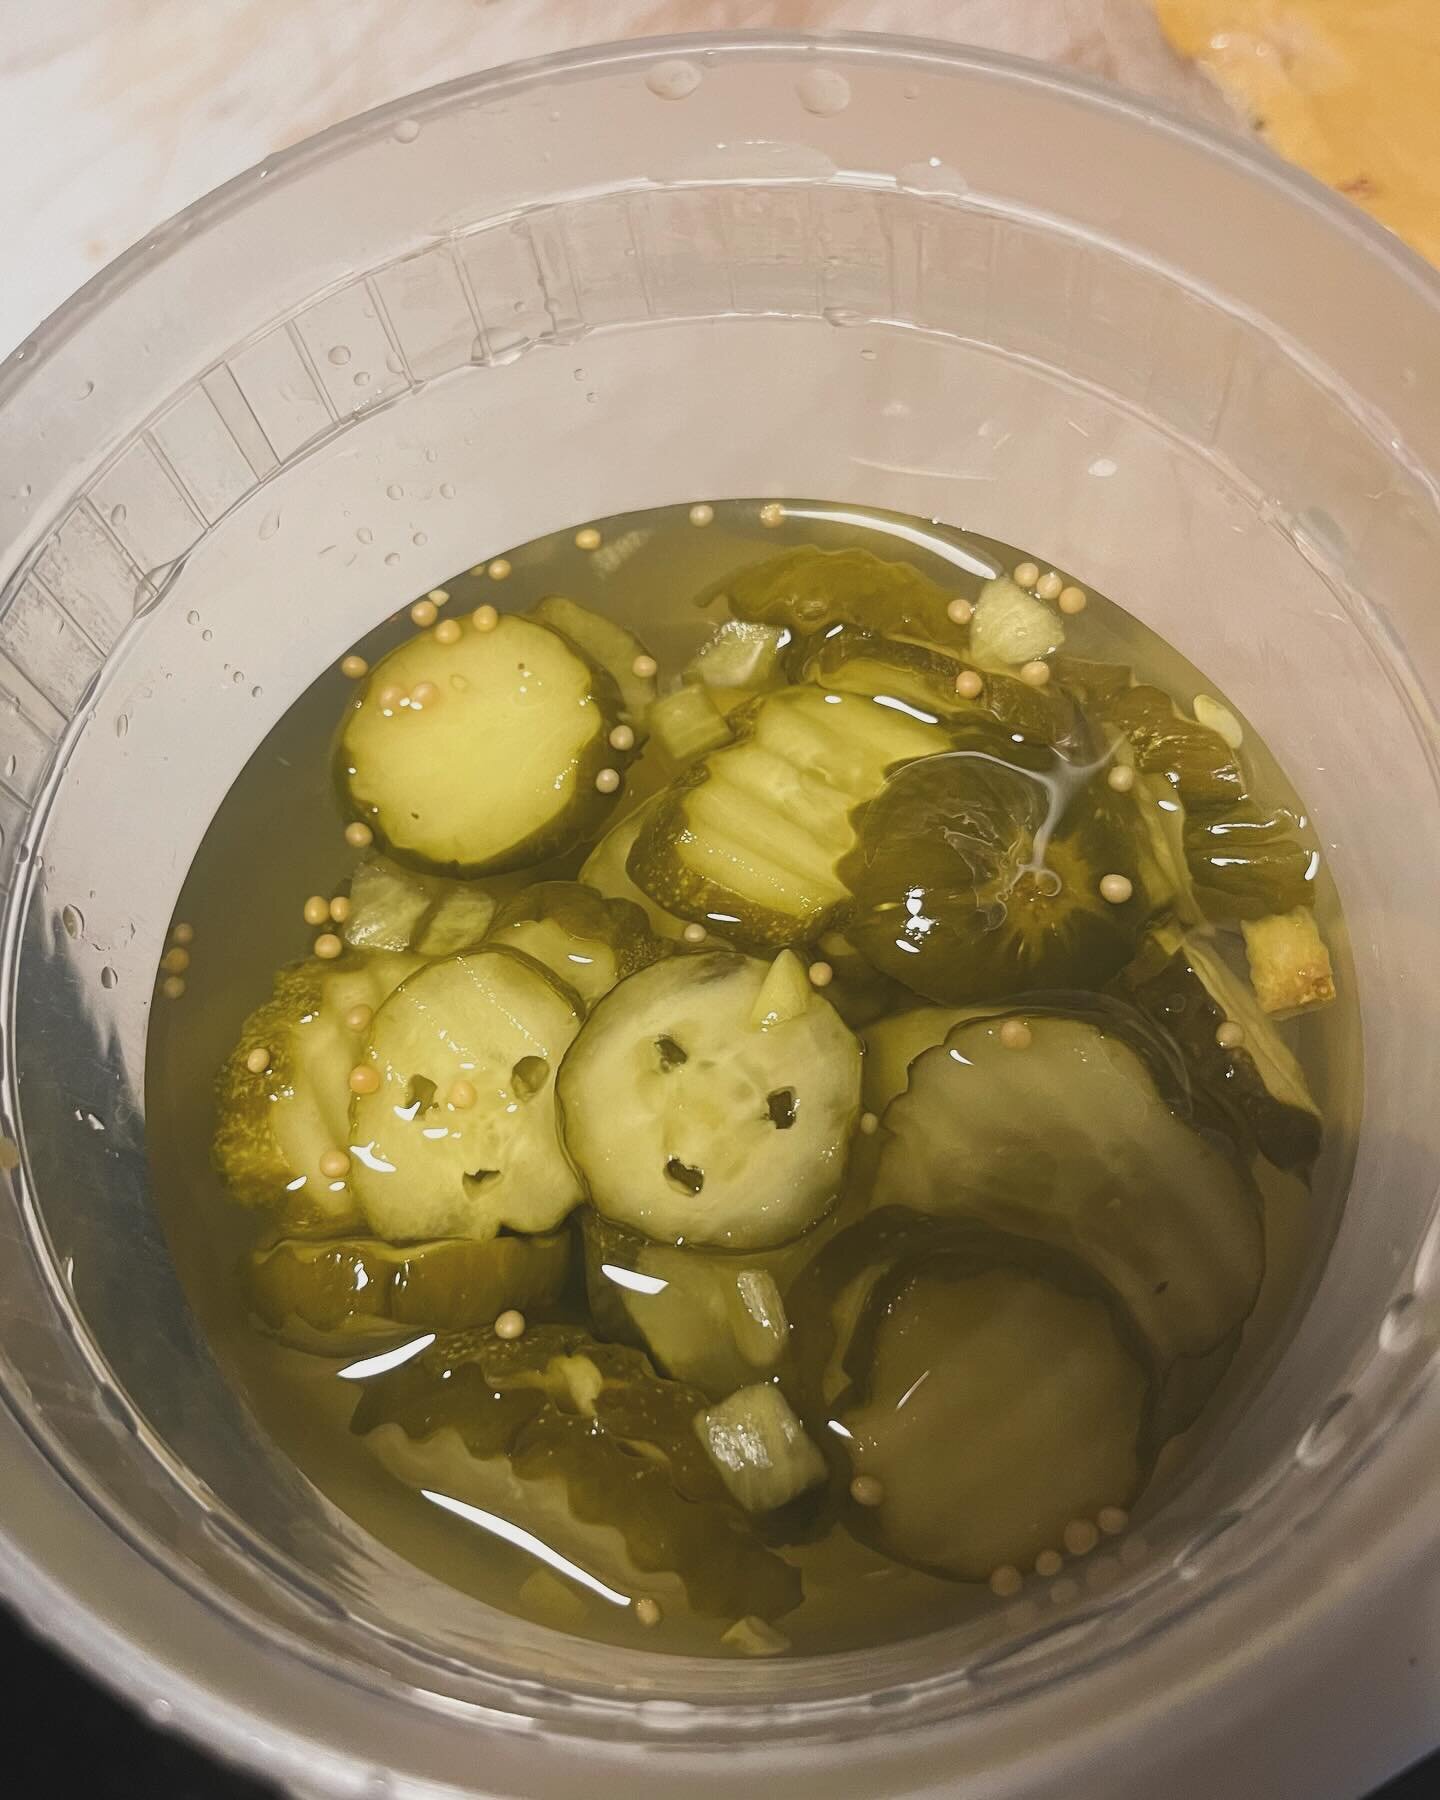 Sad faces in pickle slices because We have to close during lunch time today due to electrical maintenance. We will close from 11 AM and RE OPEN at 1 PM today.